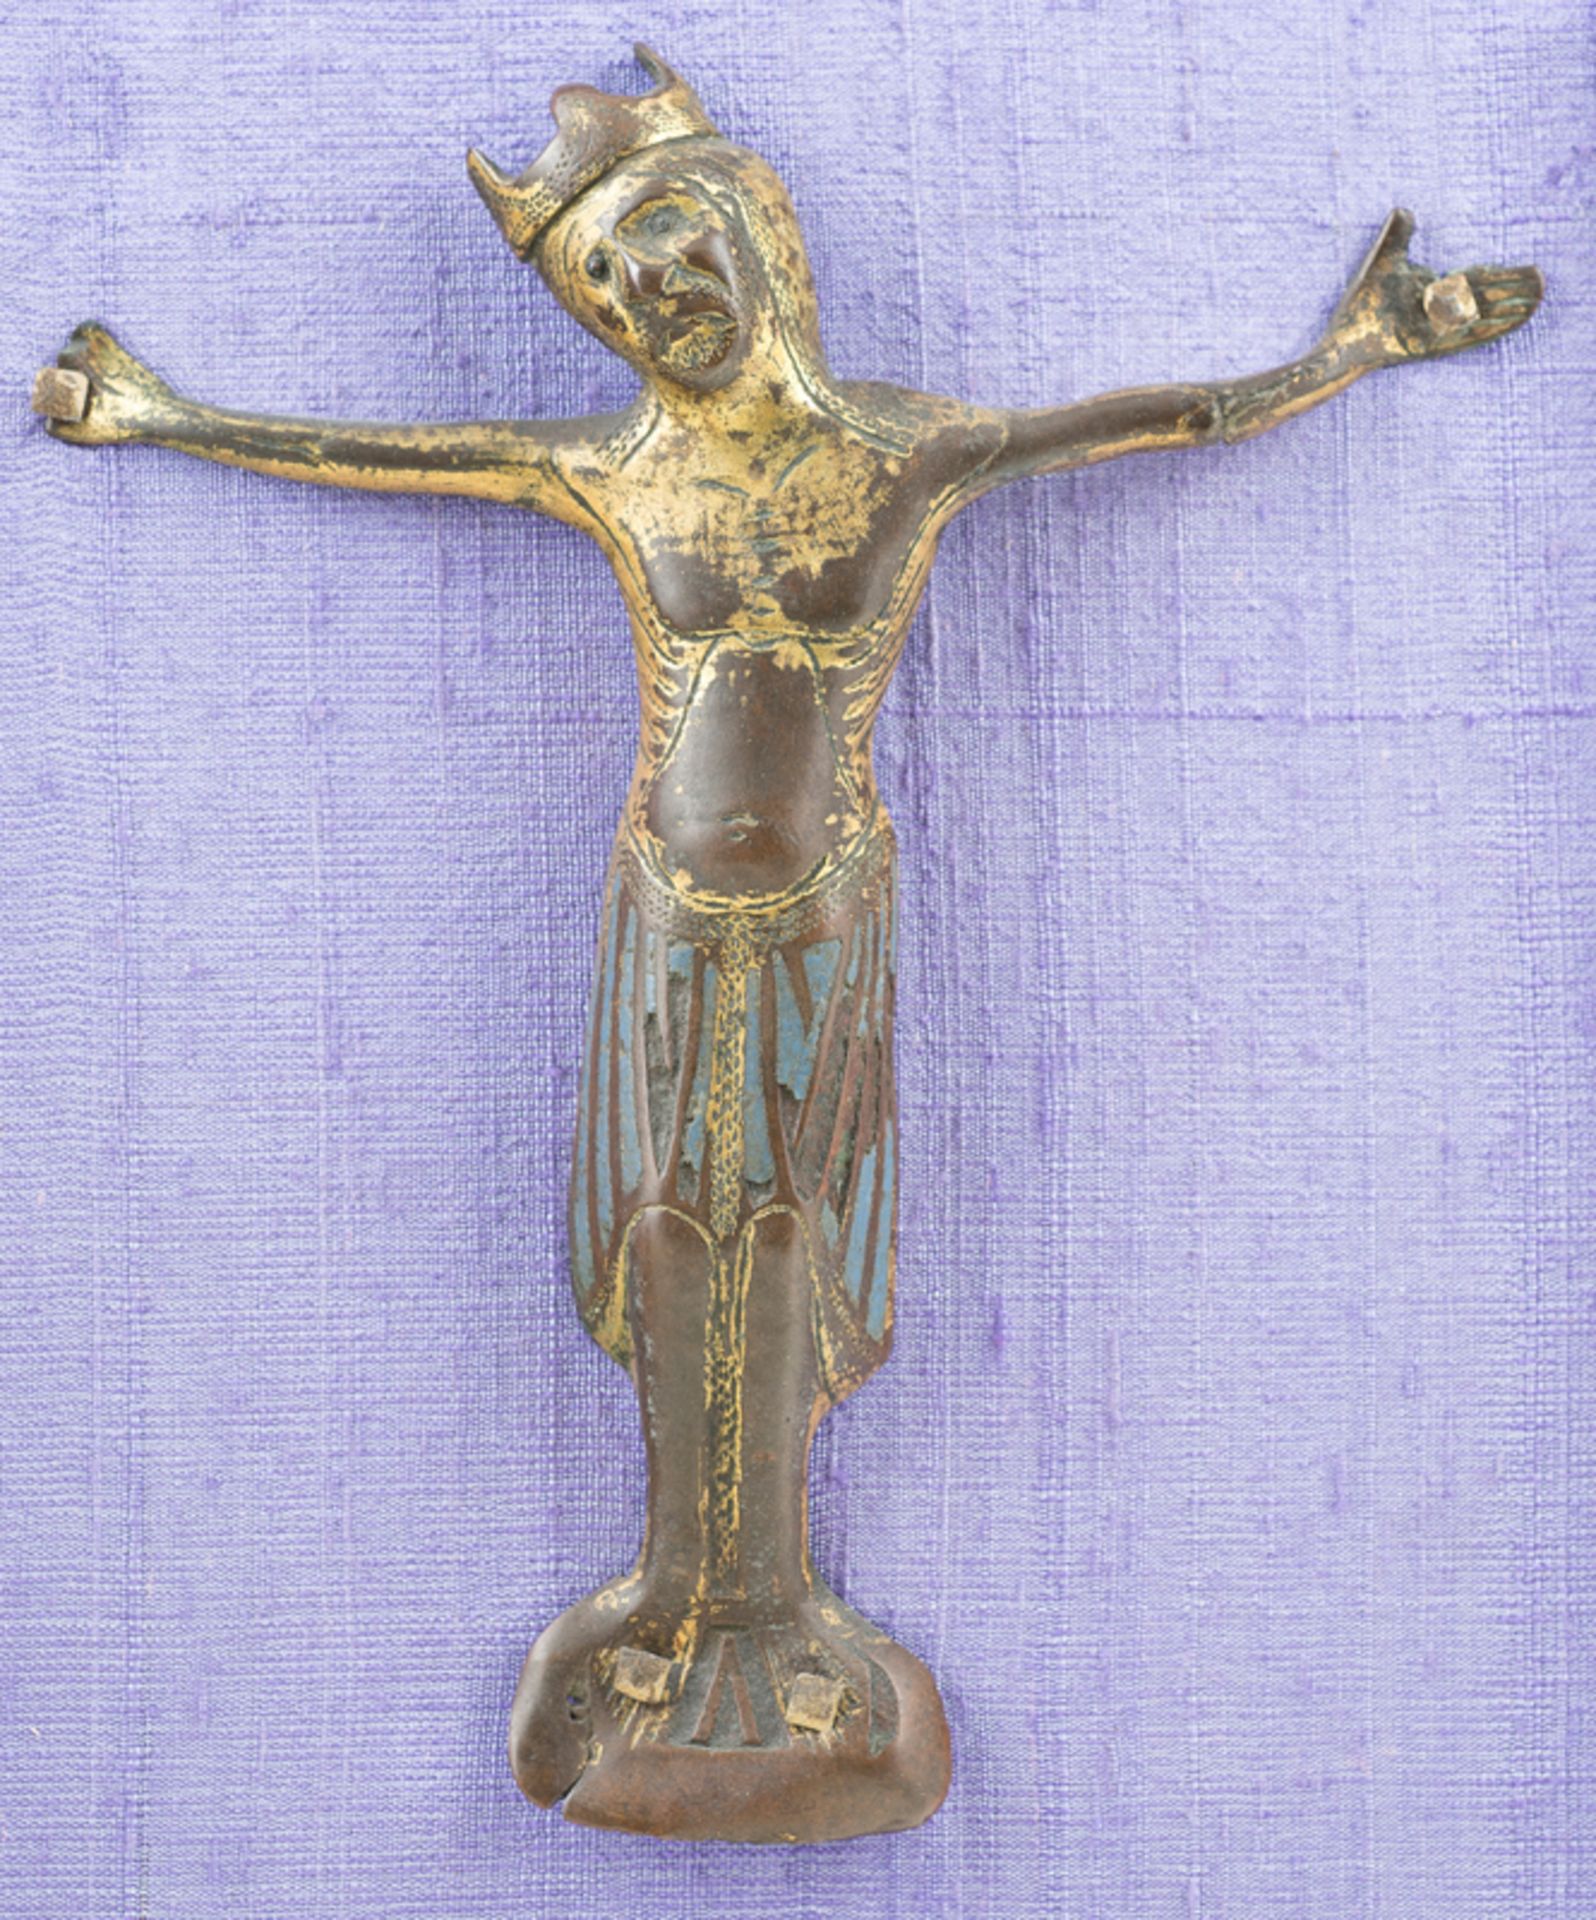 Gilded copper Christ with champlevé enamel. Limoges. France. Romanesque. 13th century.Gilded